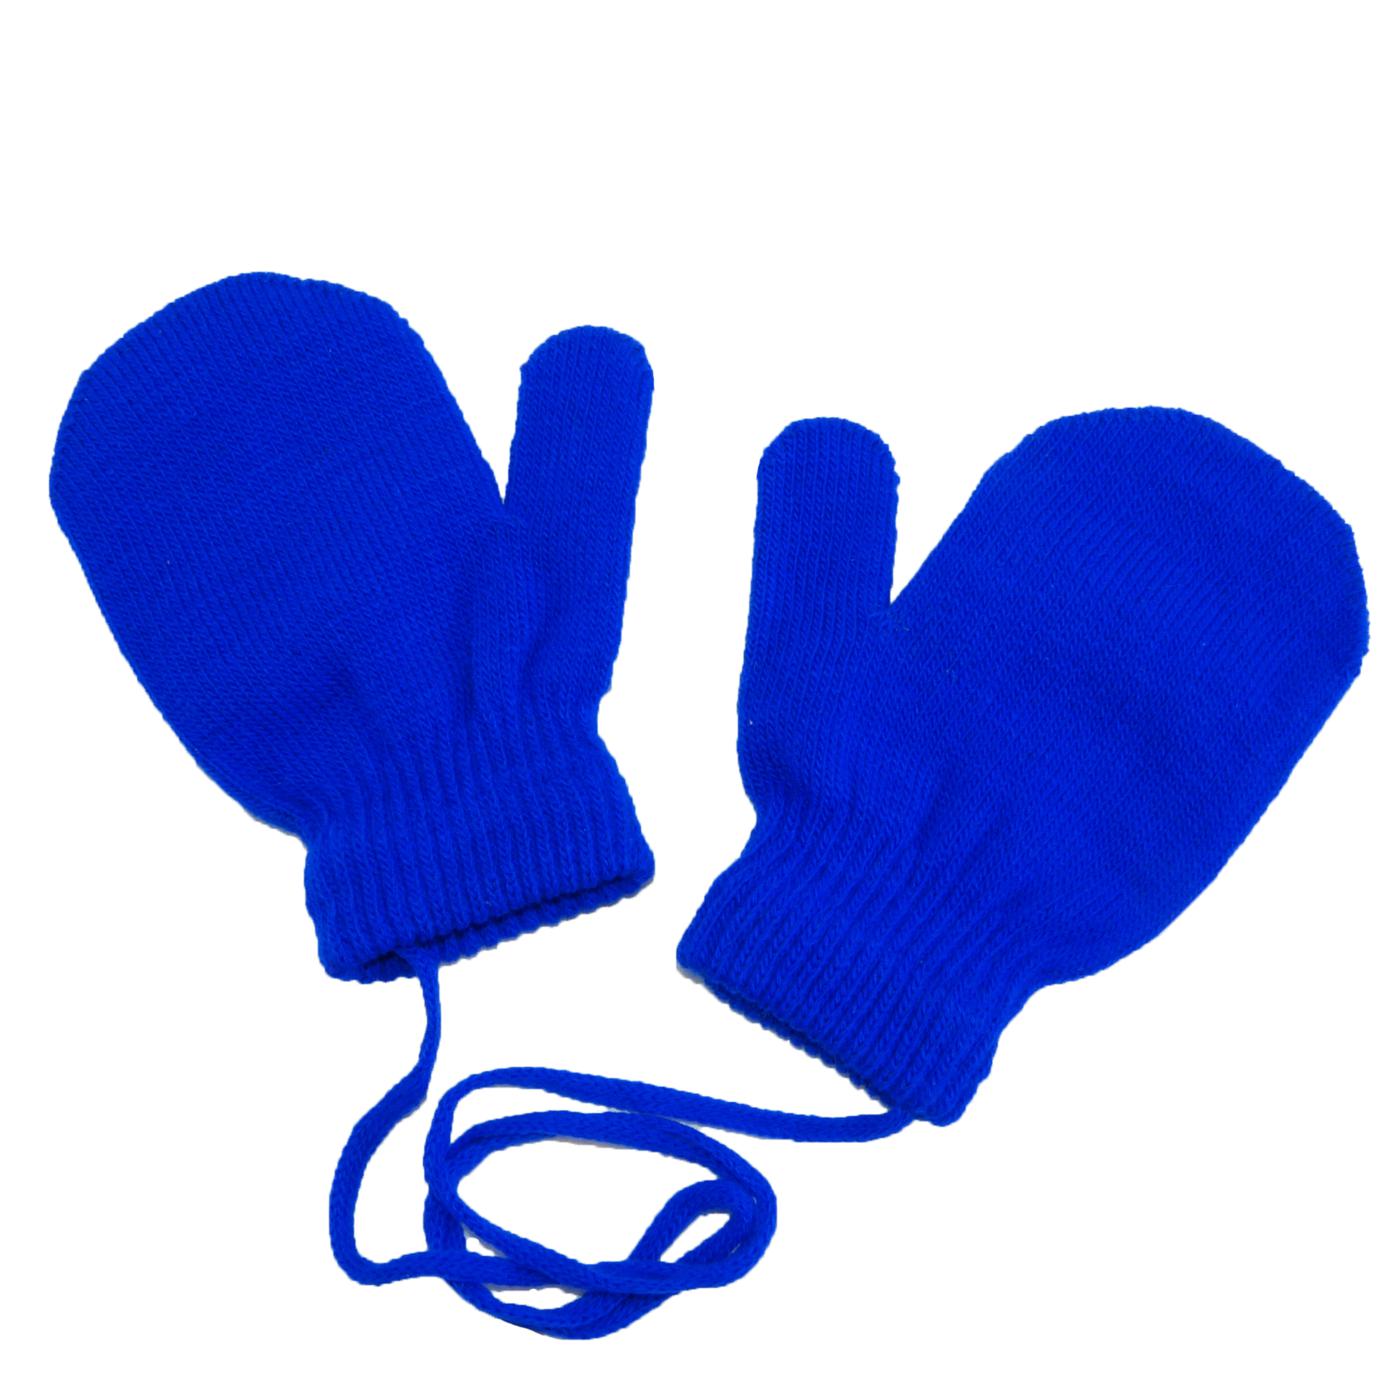 22 Pictures Of Mittens Free Cliparts That You Can Download To You